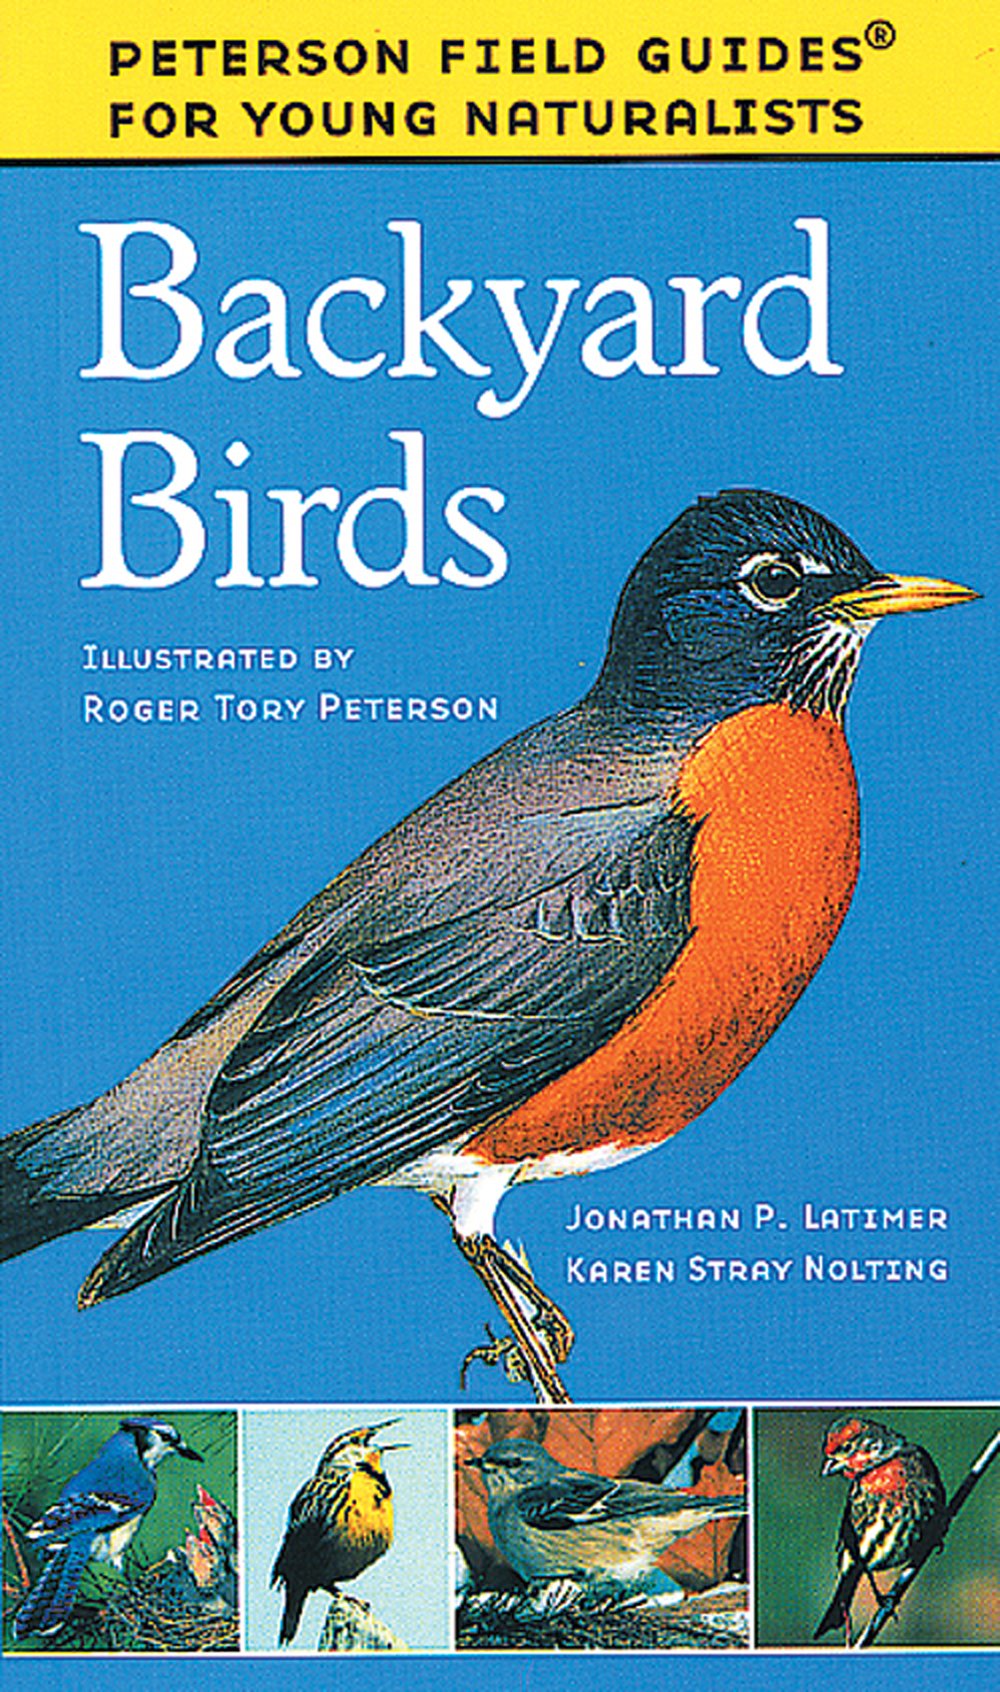 Backyard Birds (Peterson Field Guide for Young Naturalists®)